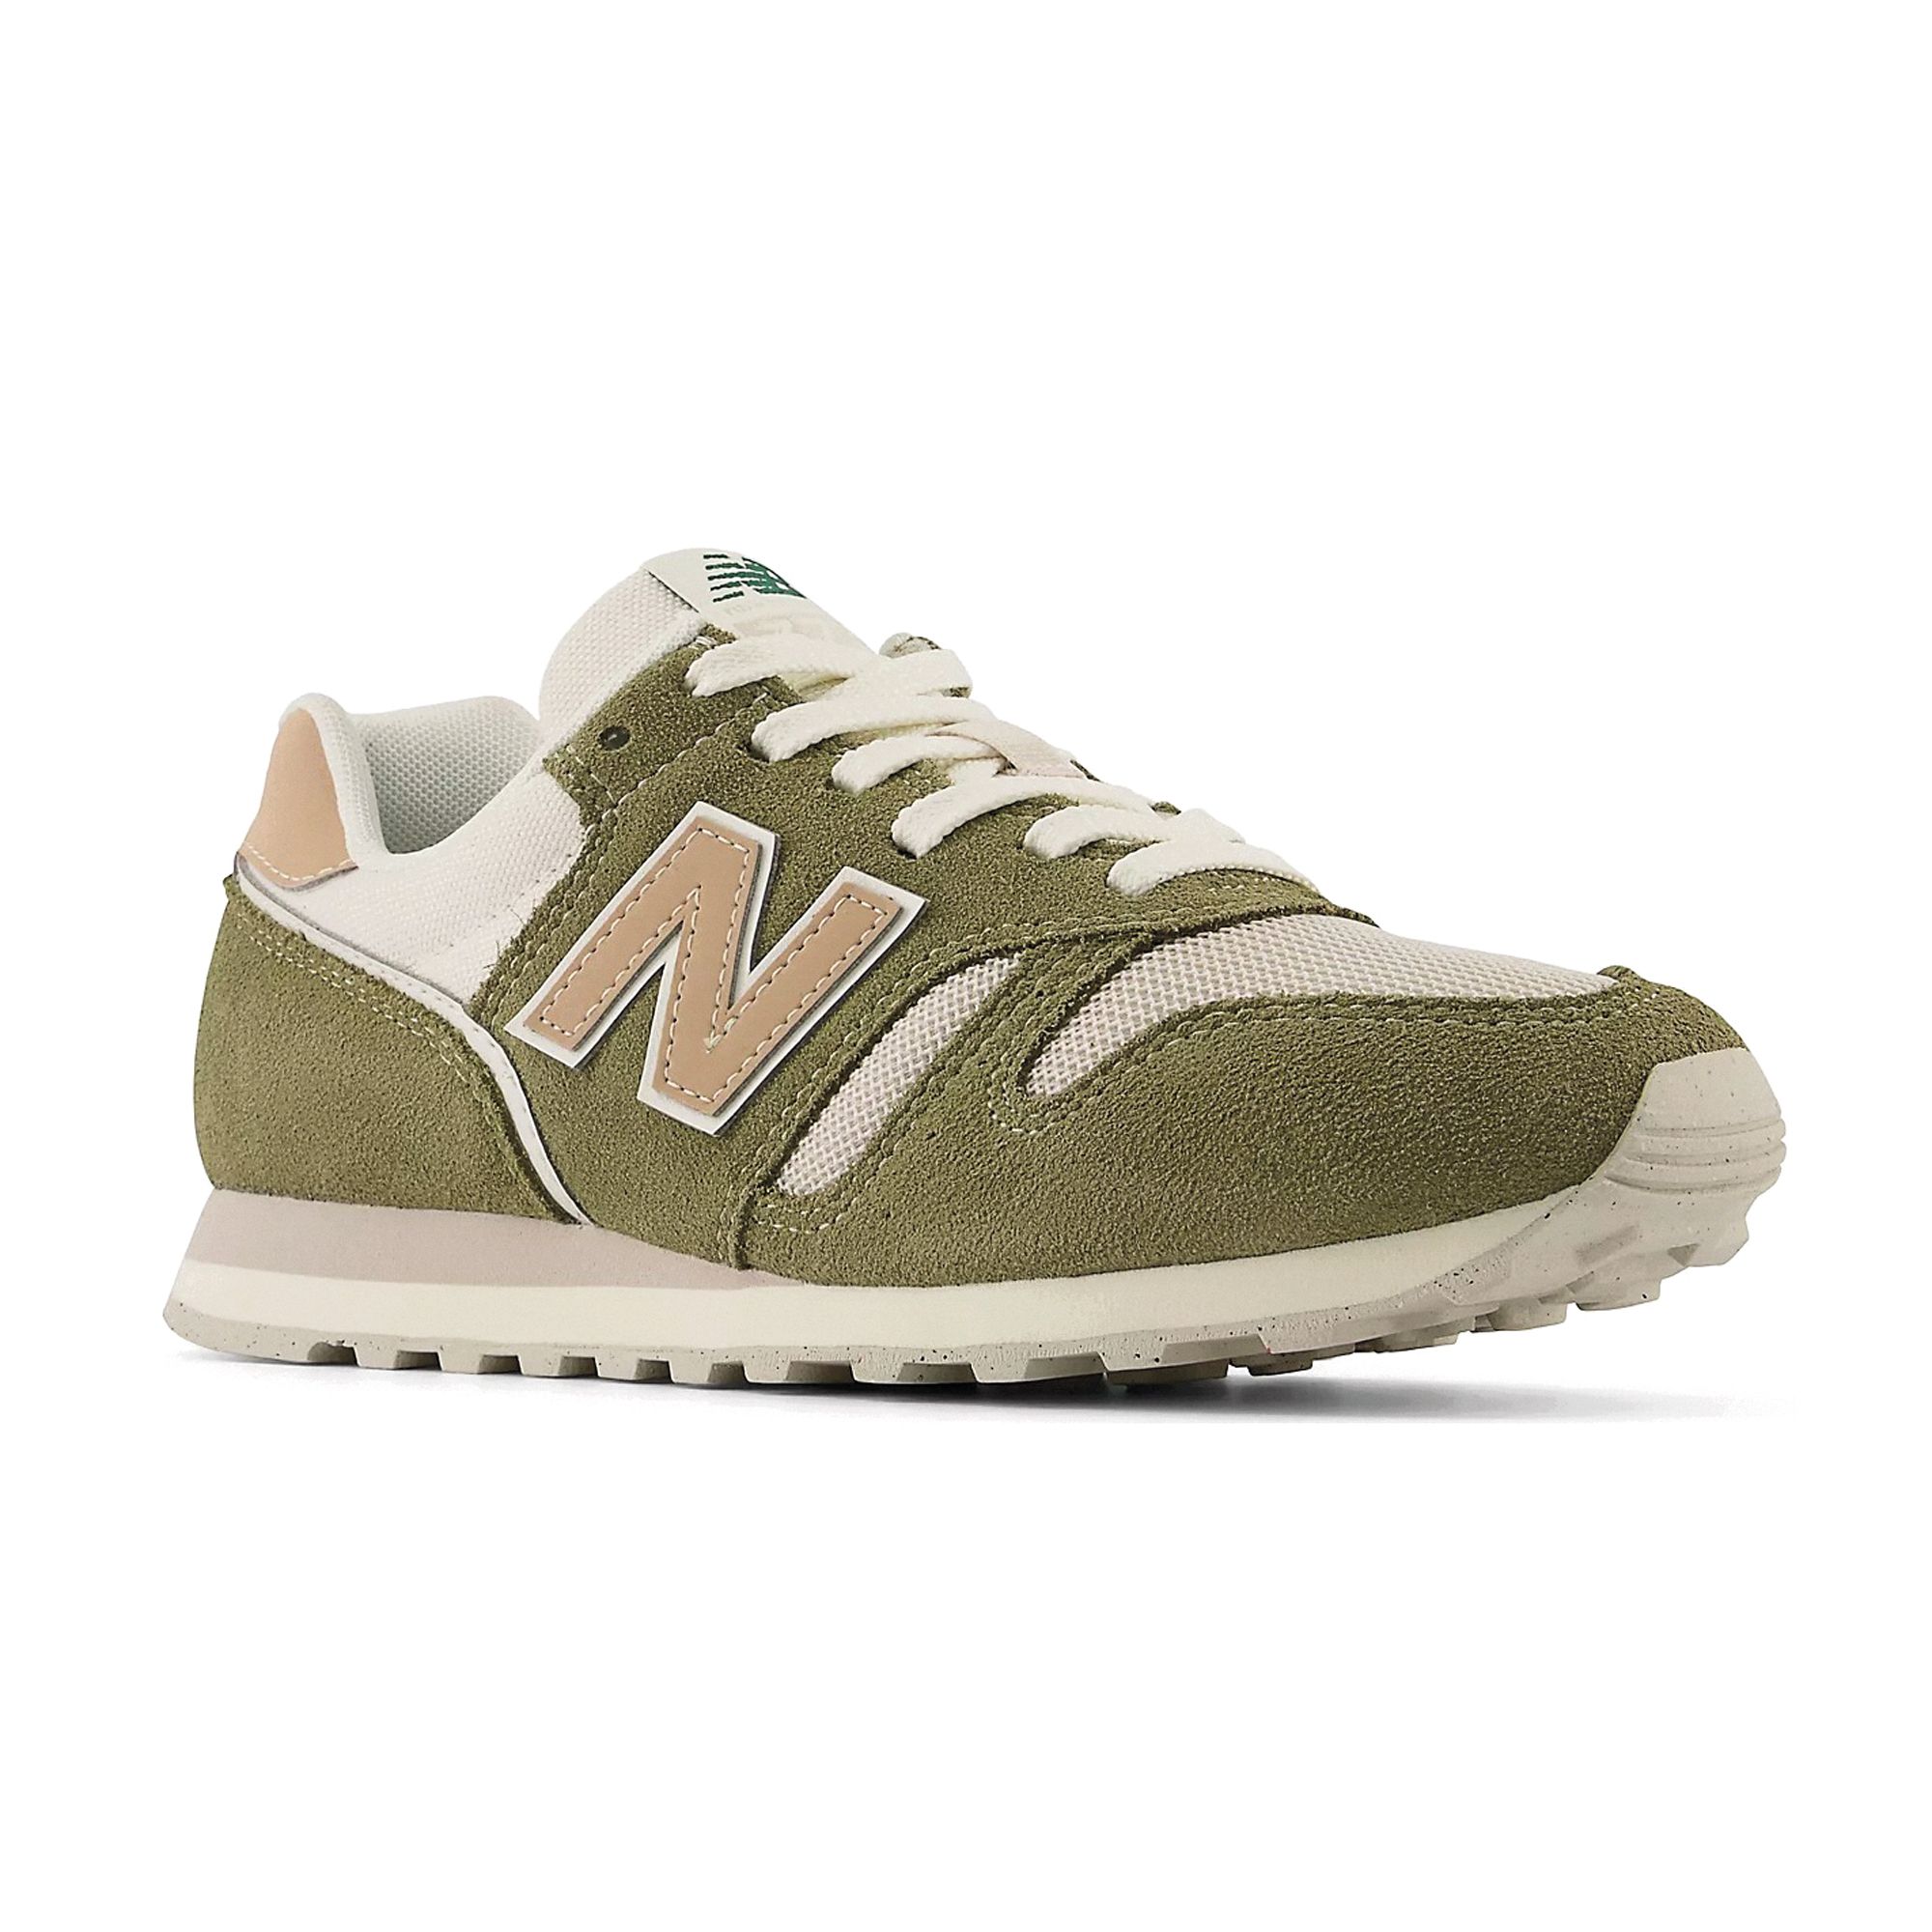 New Balance 373 Olive Best Sale | www.southernandwessexbcc.co.uk